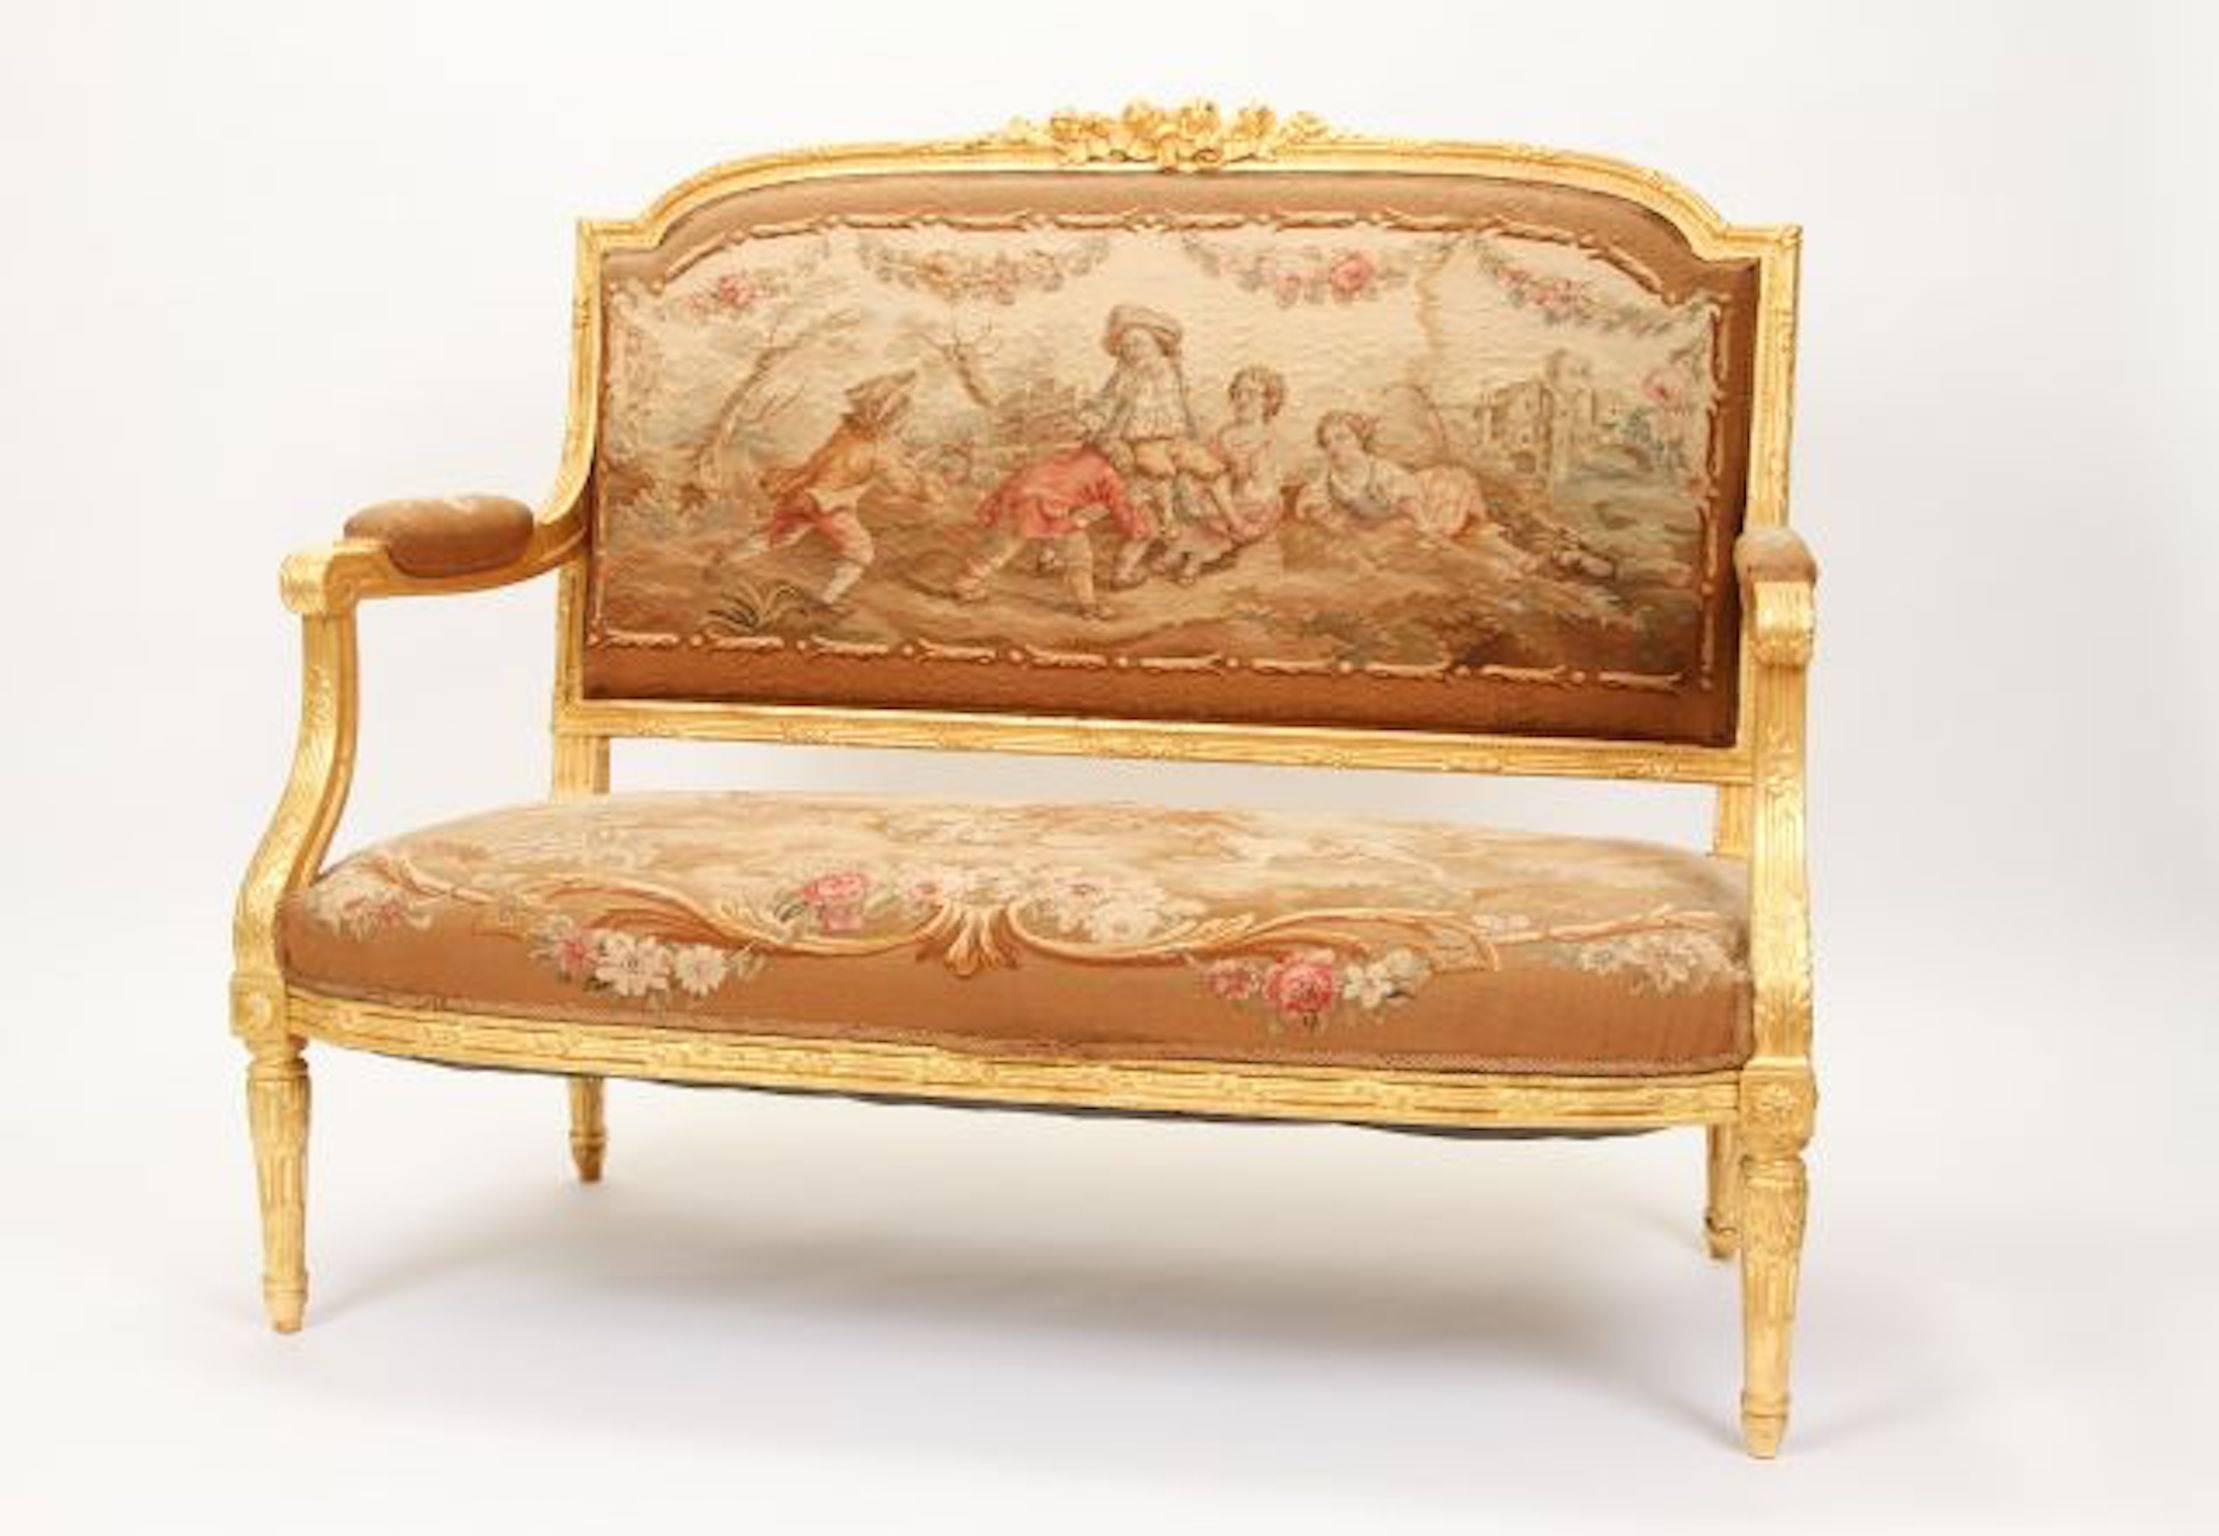 19th century  Louis XVI settee in giltwood with Aubusson tapestry of children at play and animals. Hand carved wood frame wiith excellent accenst and scroll Measures: 41" H x 50" W x 21" D.